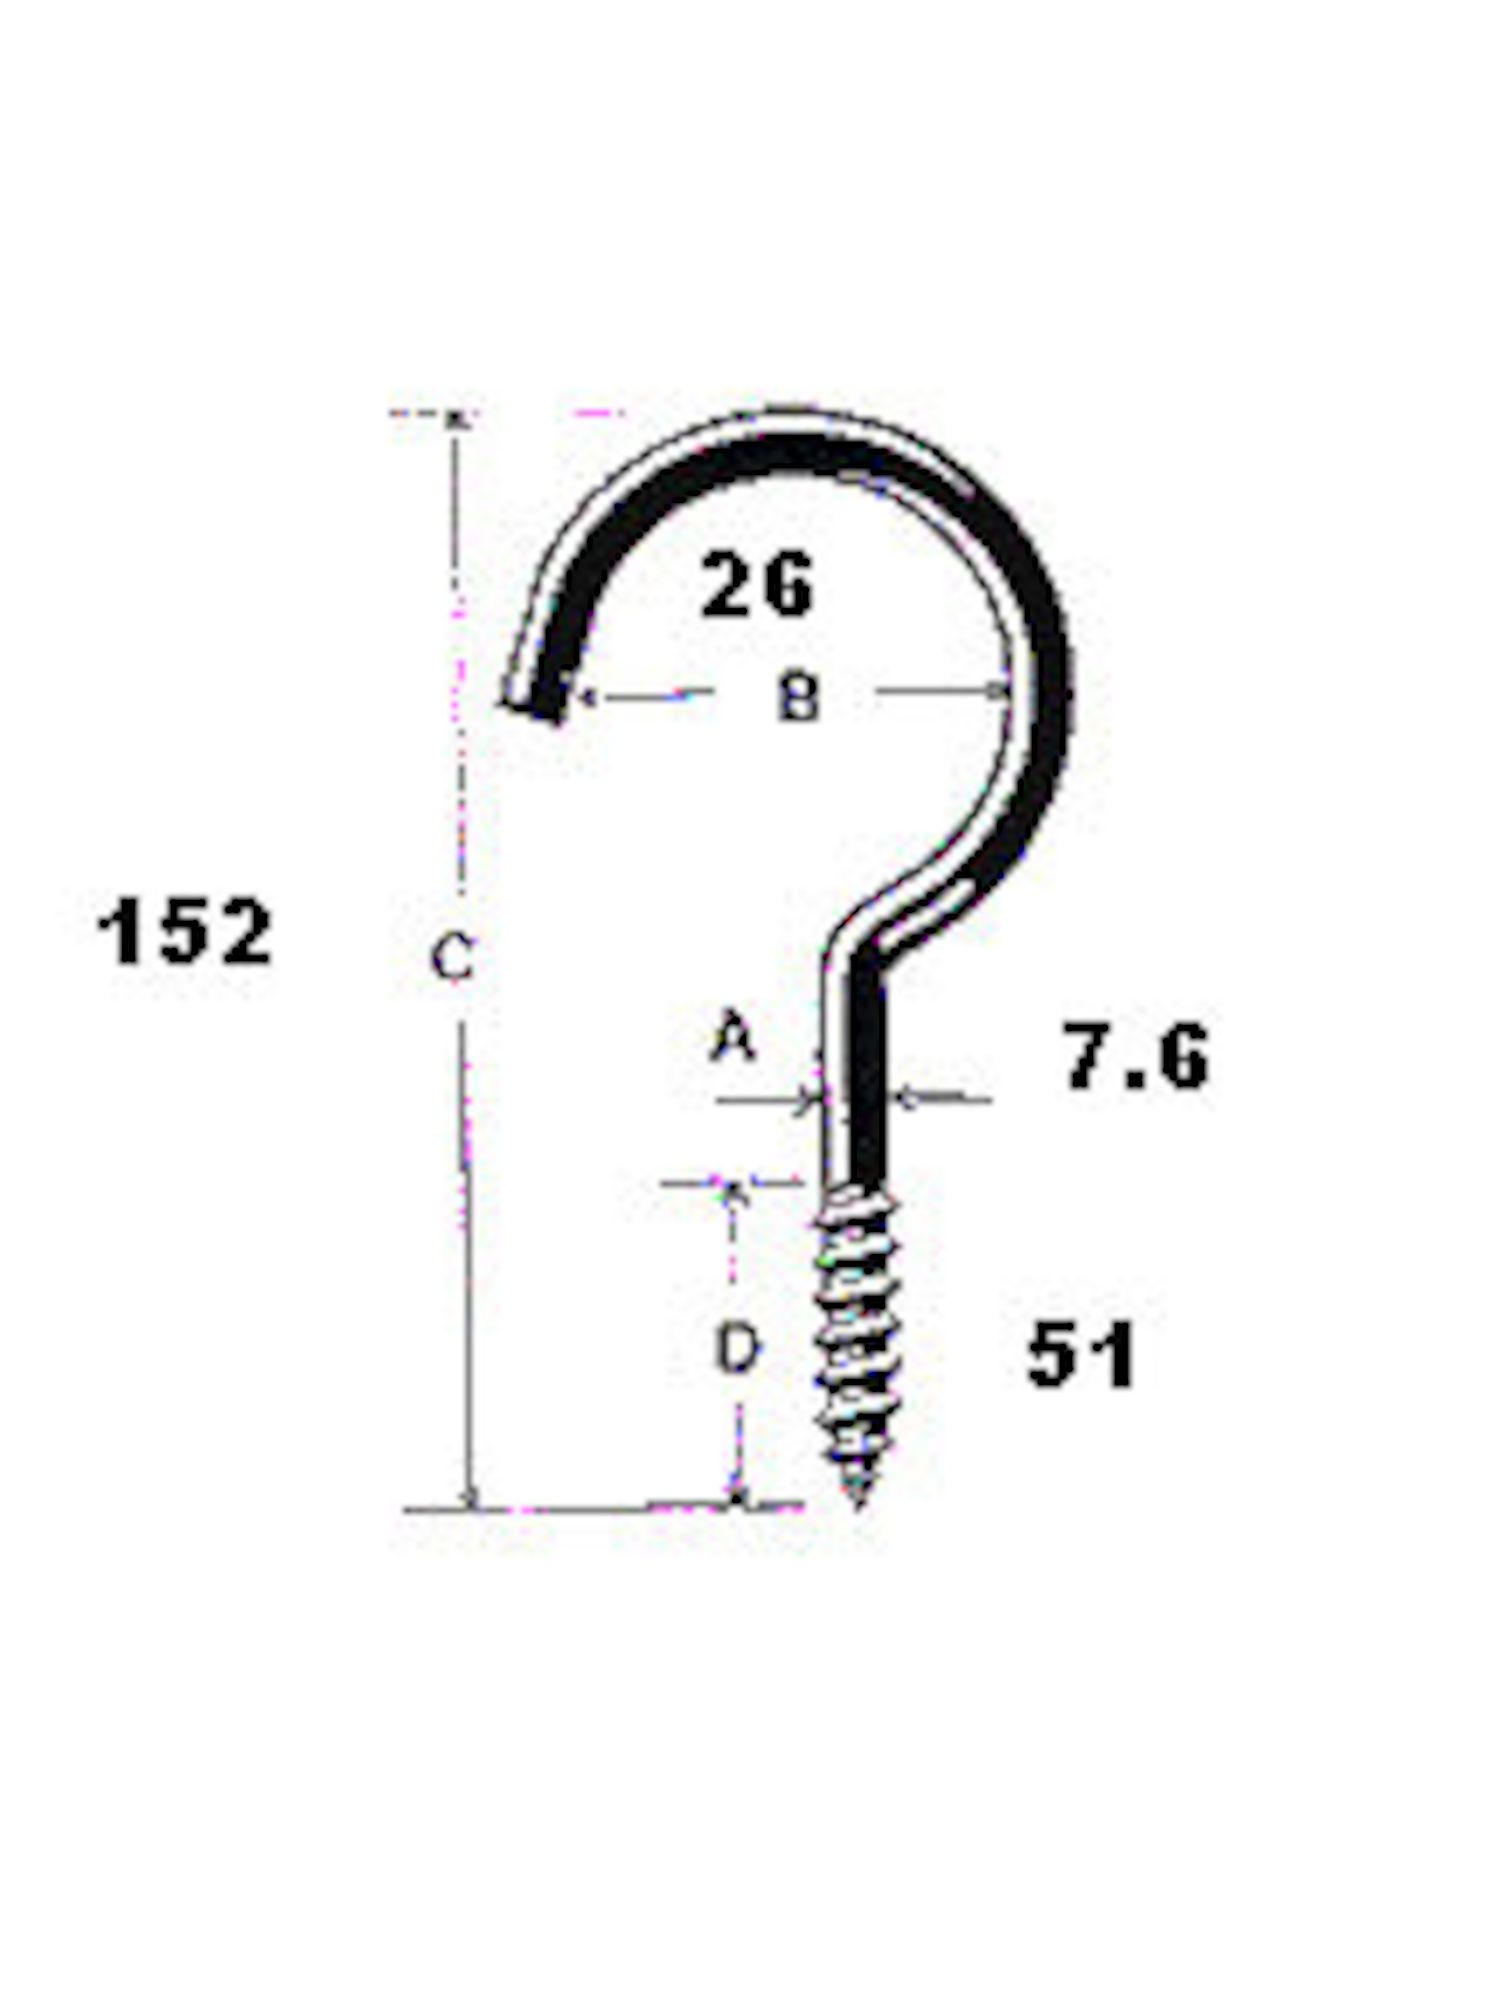  Lag Screw Hook, Zinc Plated, 0.5 Inch x 6 Inches  (Right-Threaded) : Industrial & Scientific